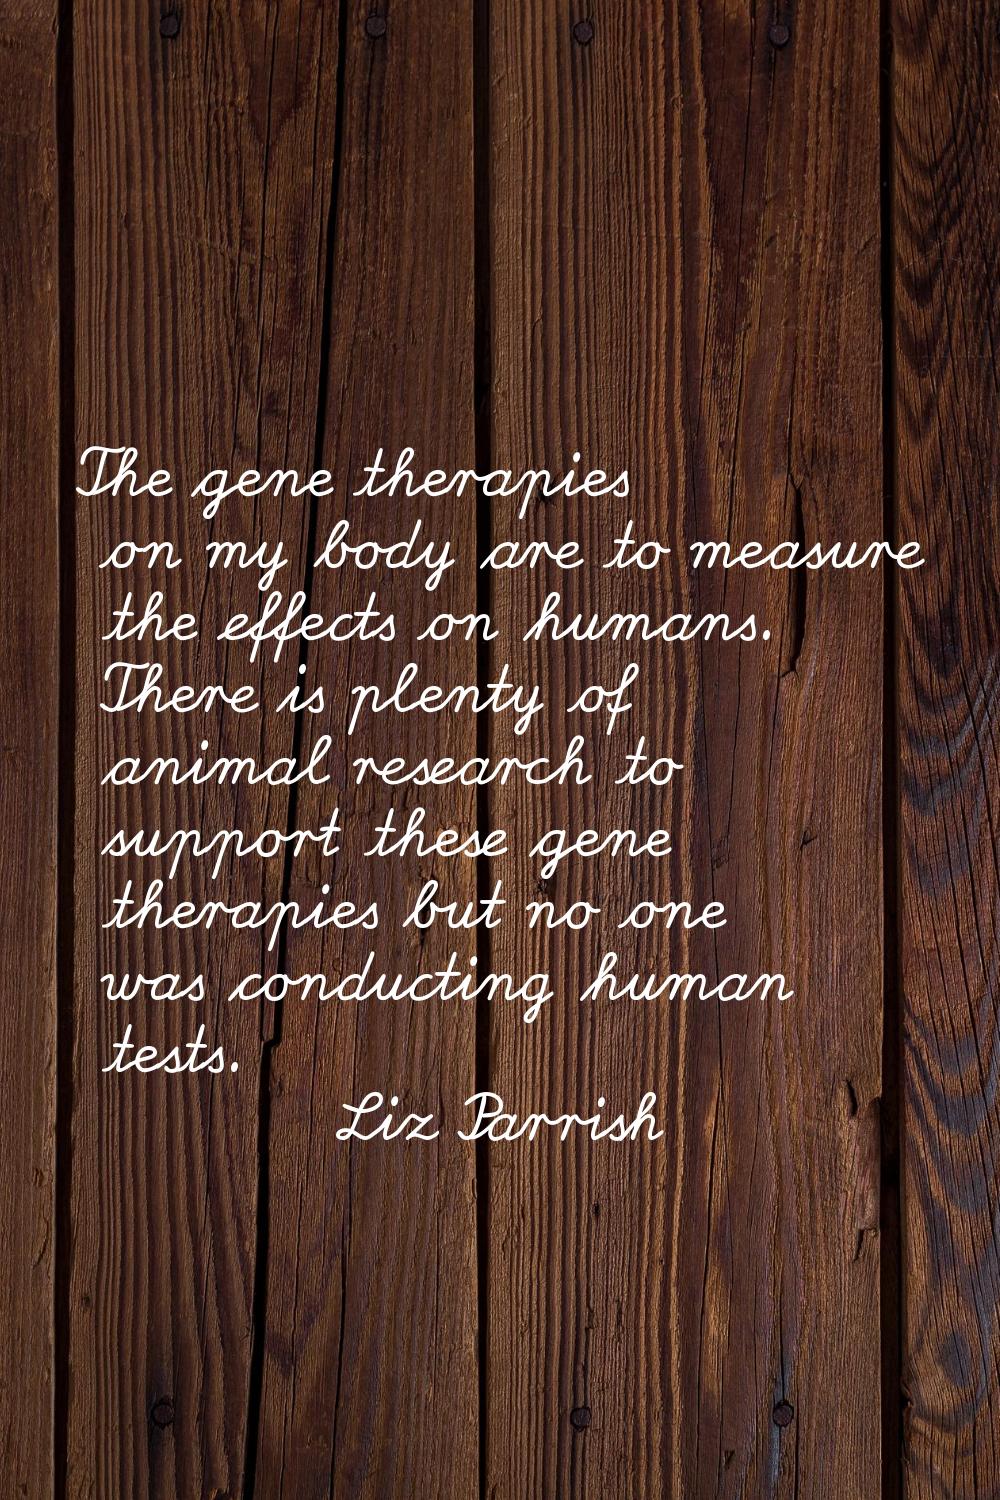 The gene therapies on my body are to measure the effects on humans. There is plenty of animal resea